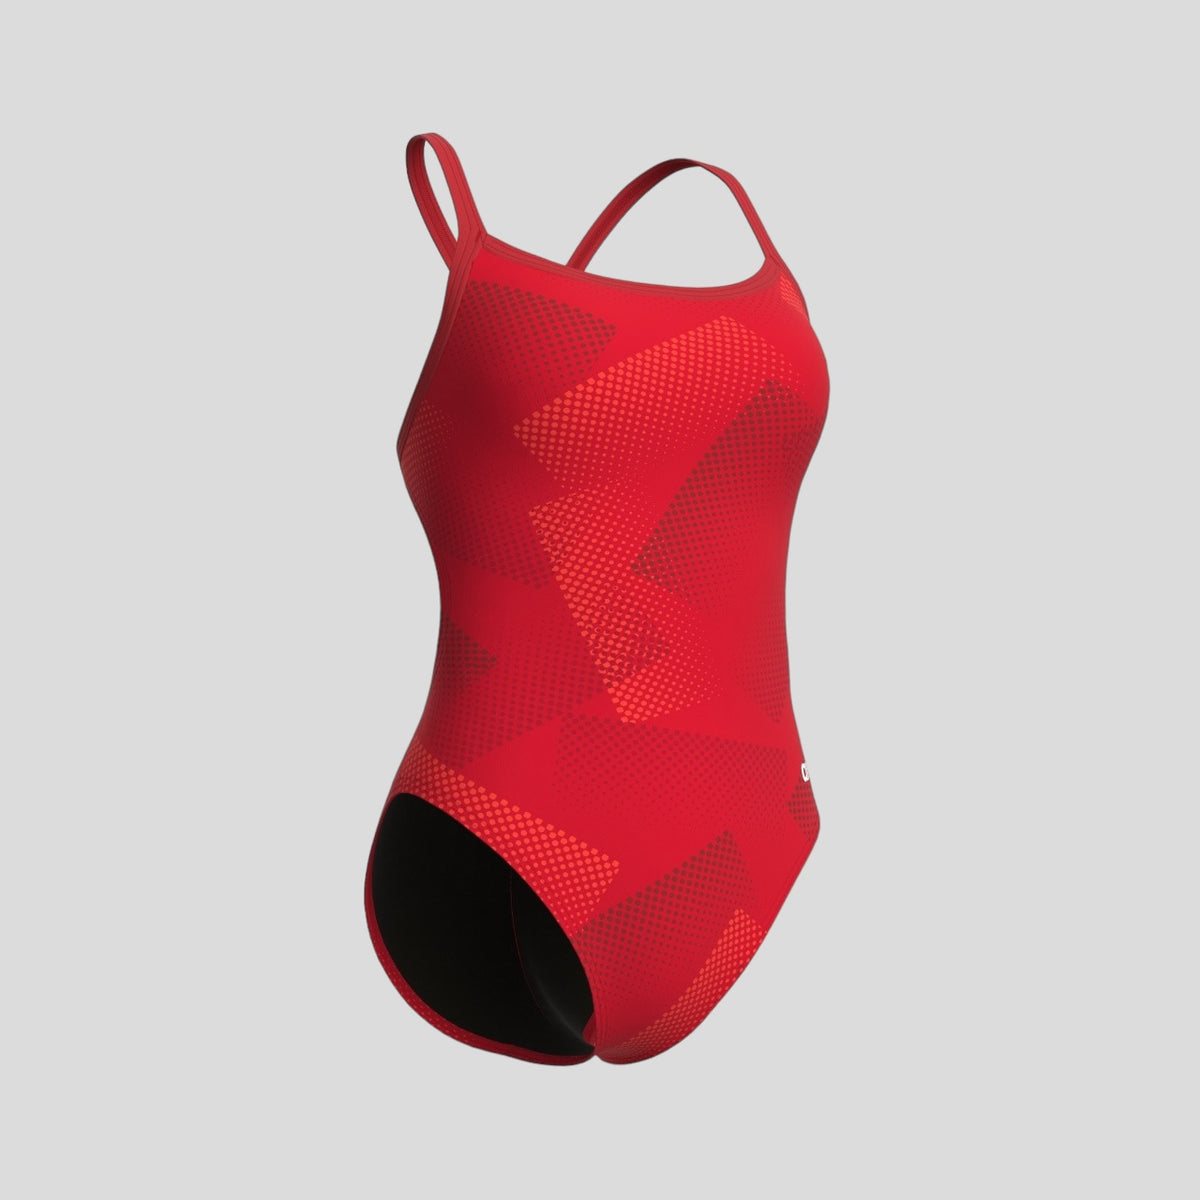 WOMENS ARENA HALFTONE SWIMSUIT CHALLENGE BACK